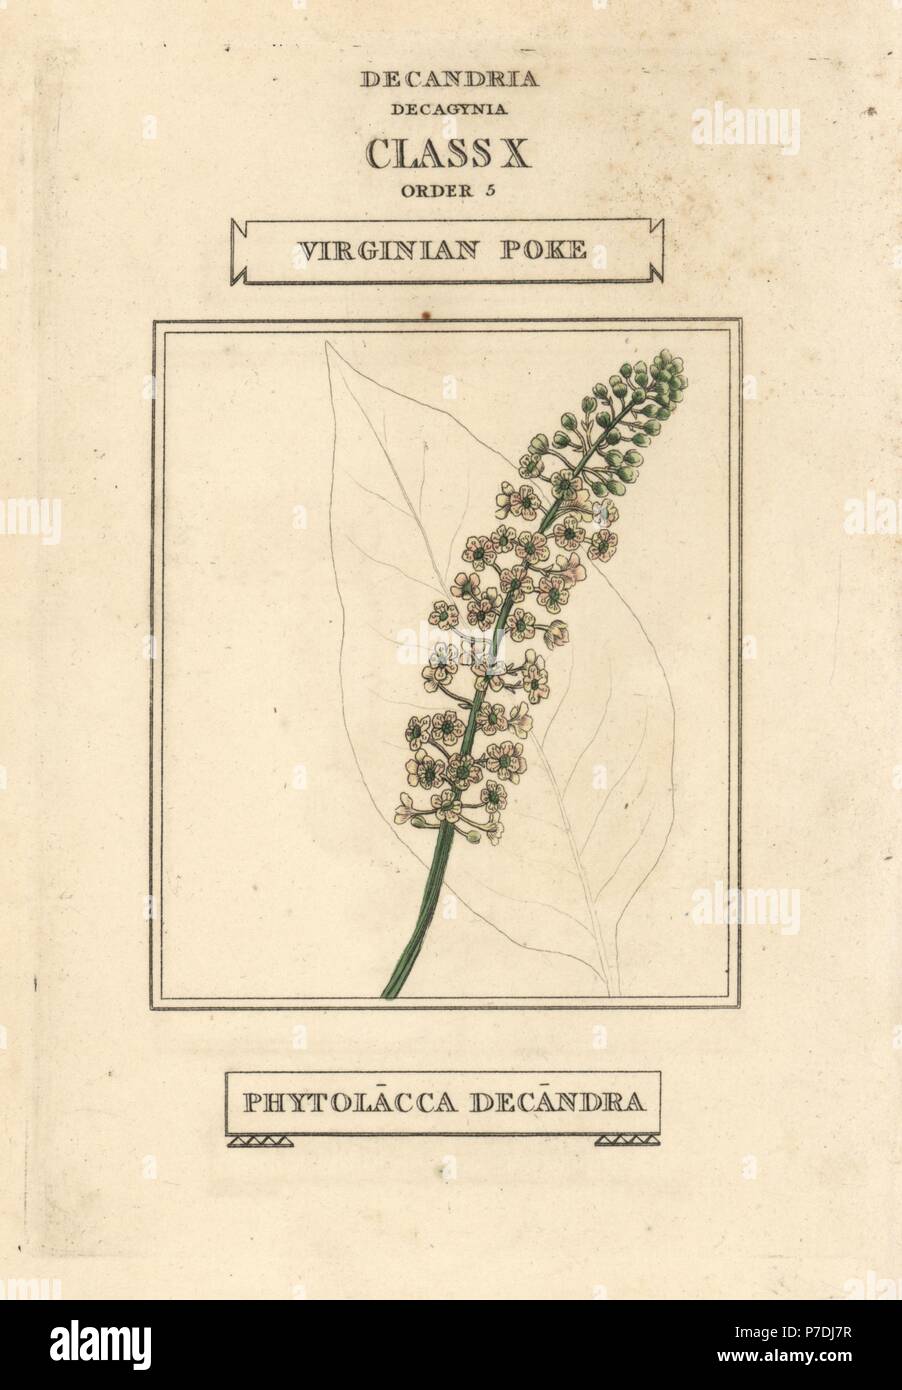 American pokeweed, Phytolacca americana (Virginian poke, Phytolacca decandra). Handcoloured copperplate engraving after an illustration by Richard Duppa from his The Classes and Orders of the Linnaean System of Botany, Longman, Hurst, London, 1816. Stock Photo